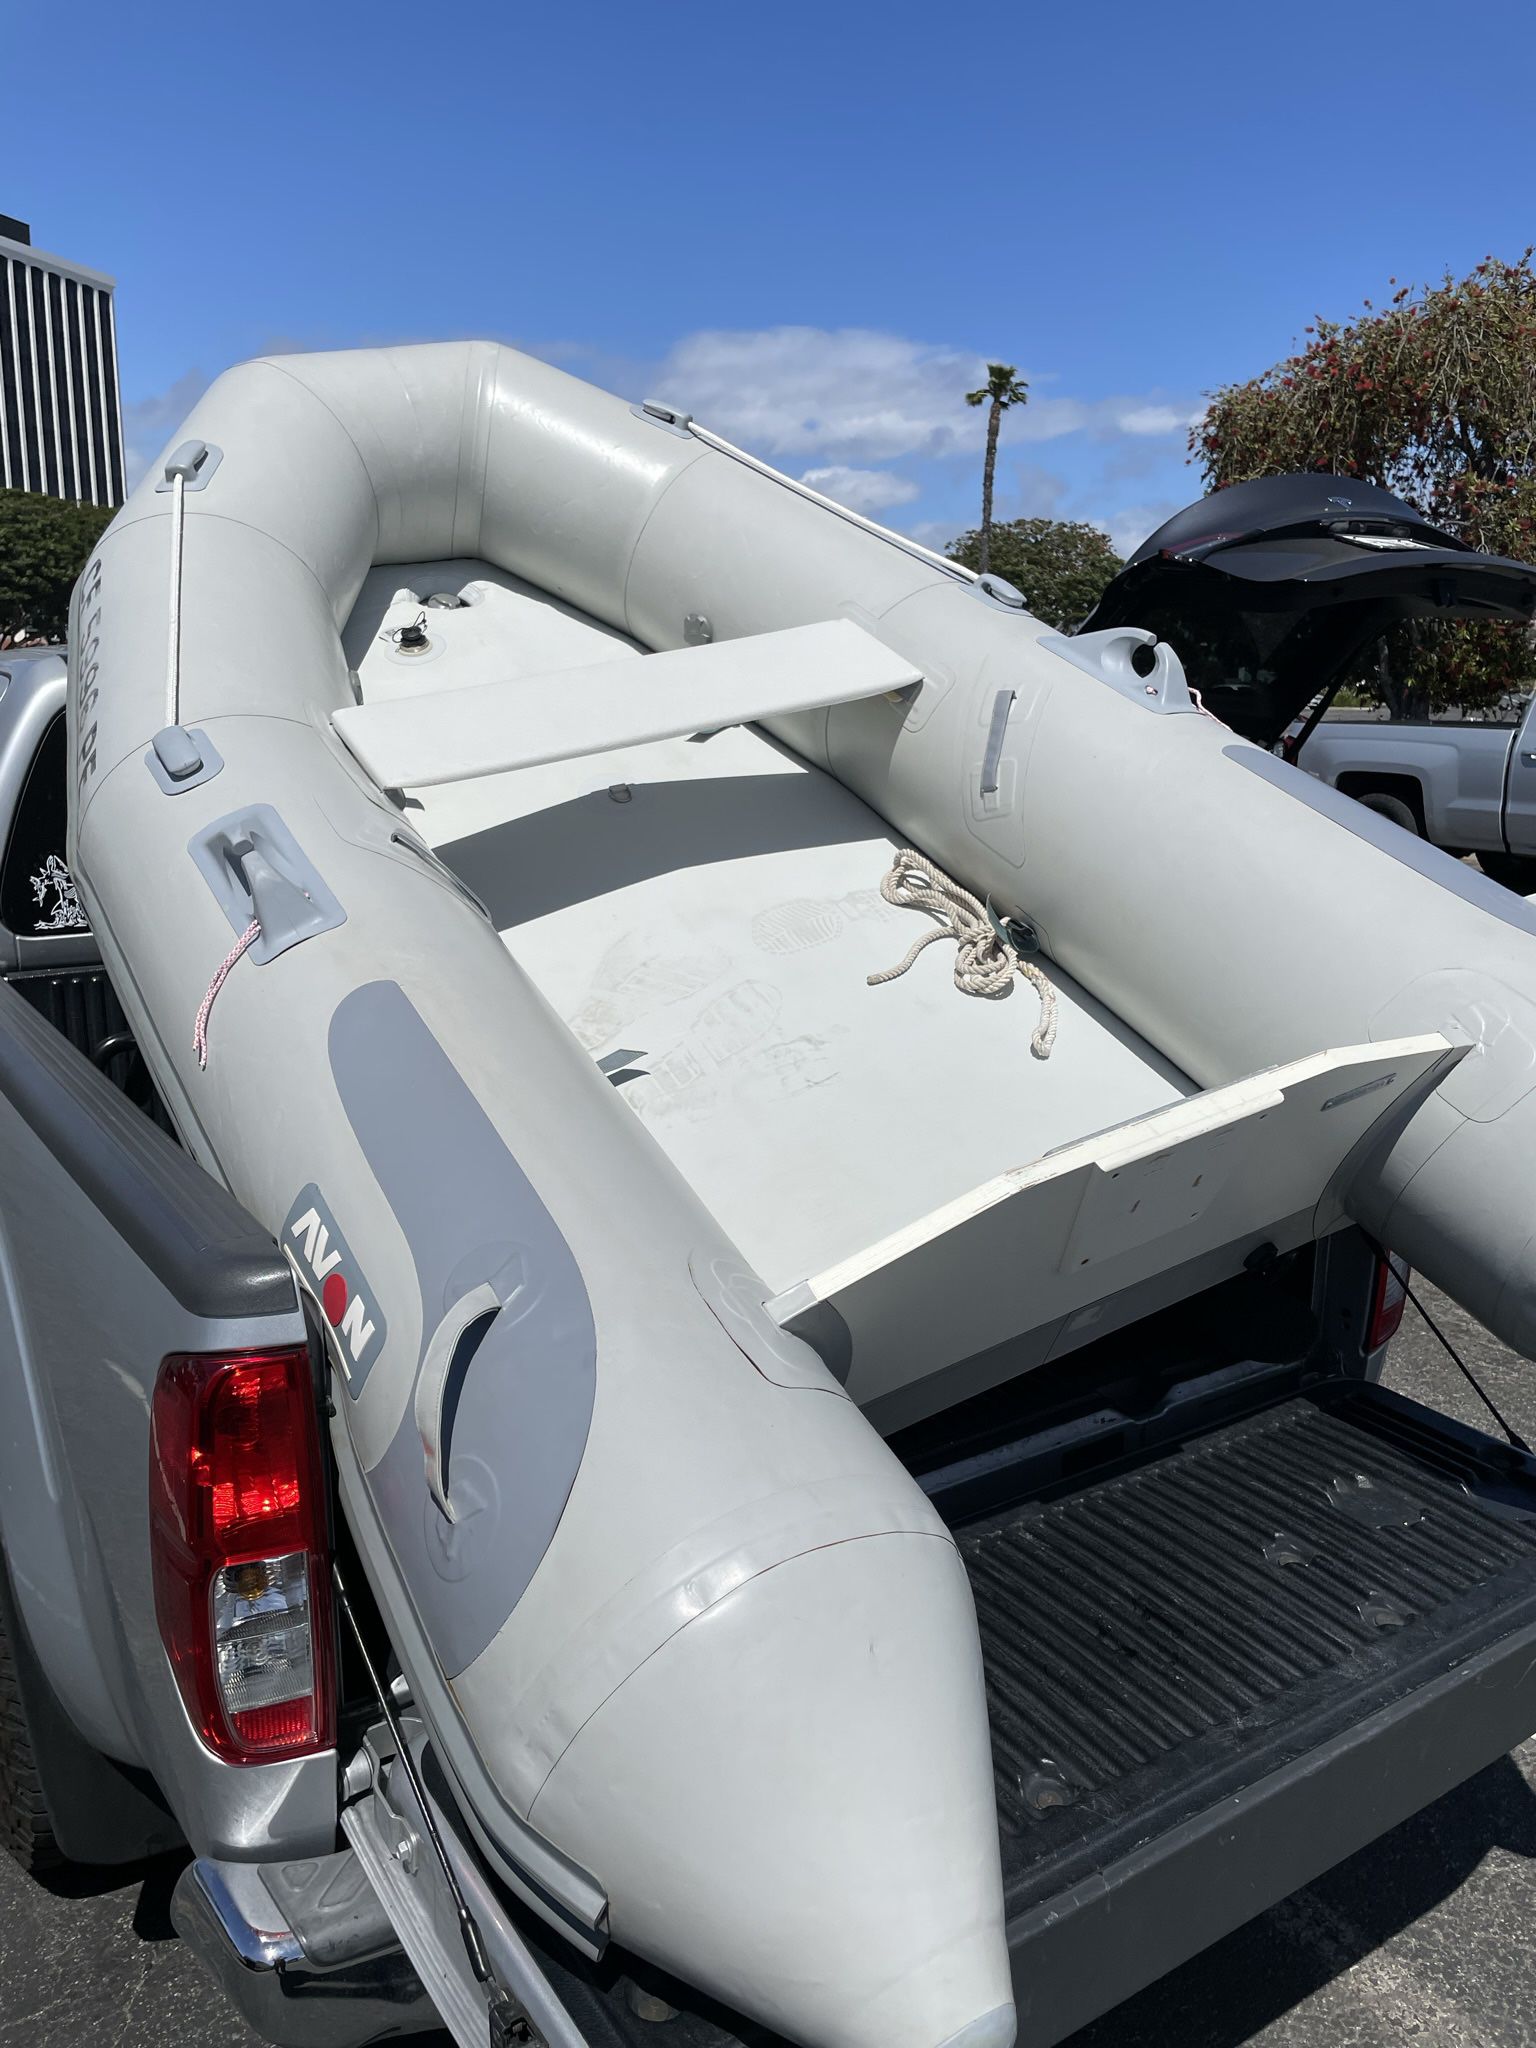 Avon Inflatable Dinghy With Mercury Motor